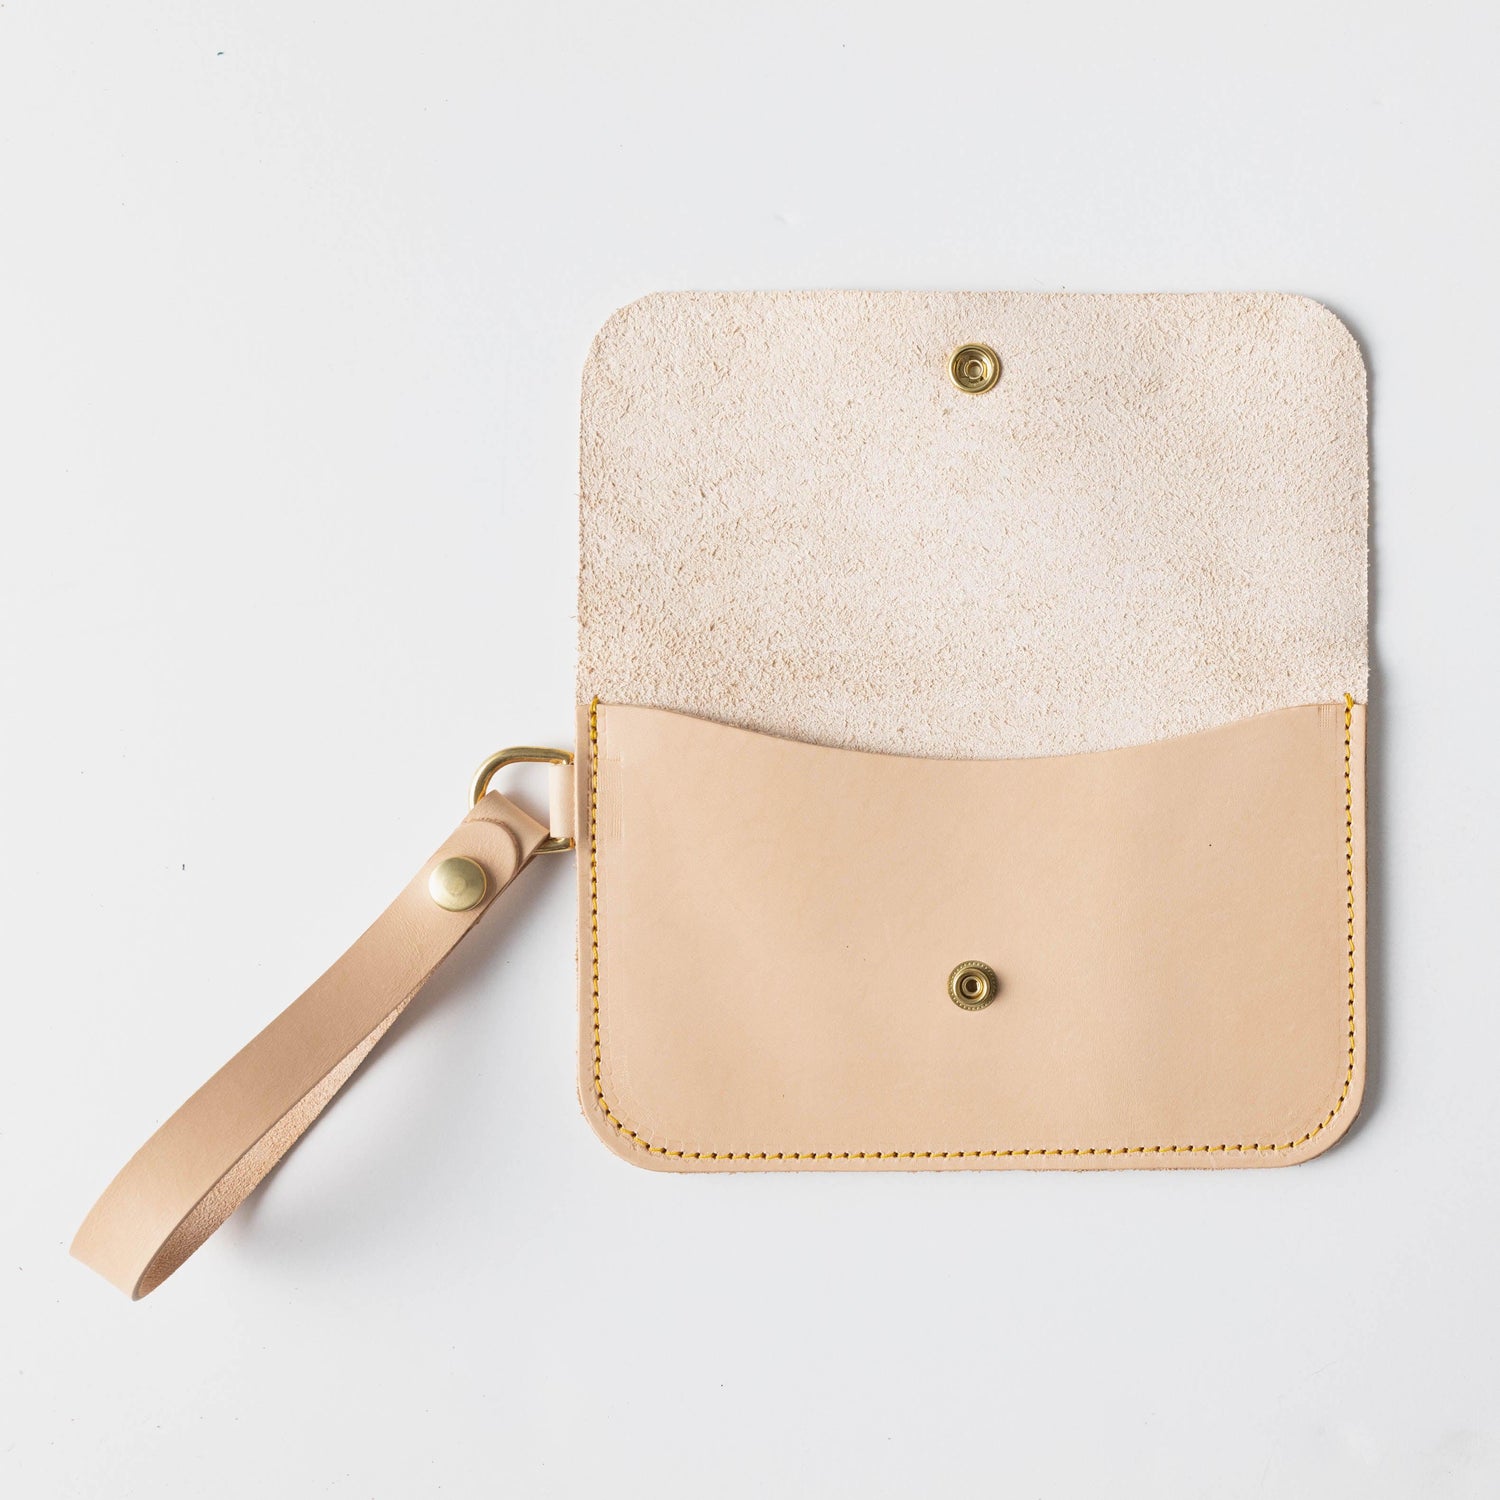 Vegetable Tanned Wristlet Clutch